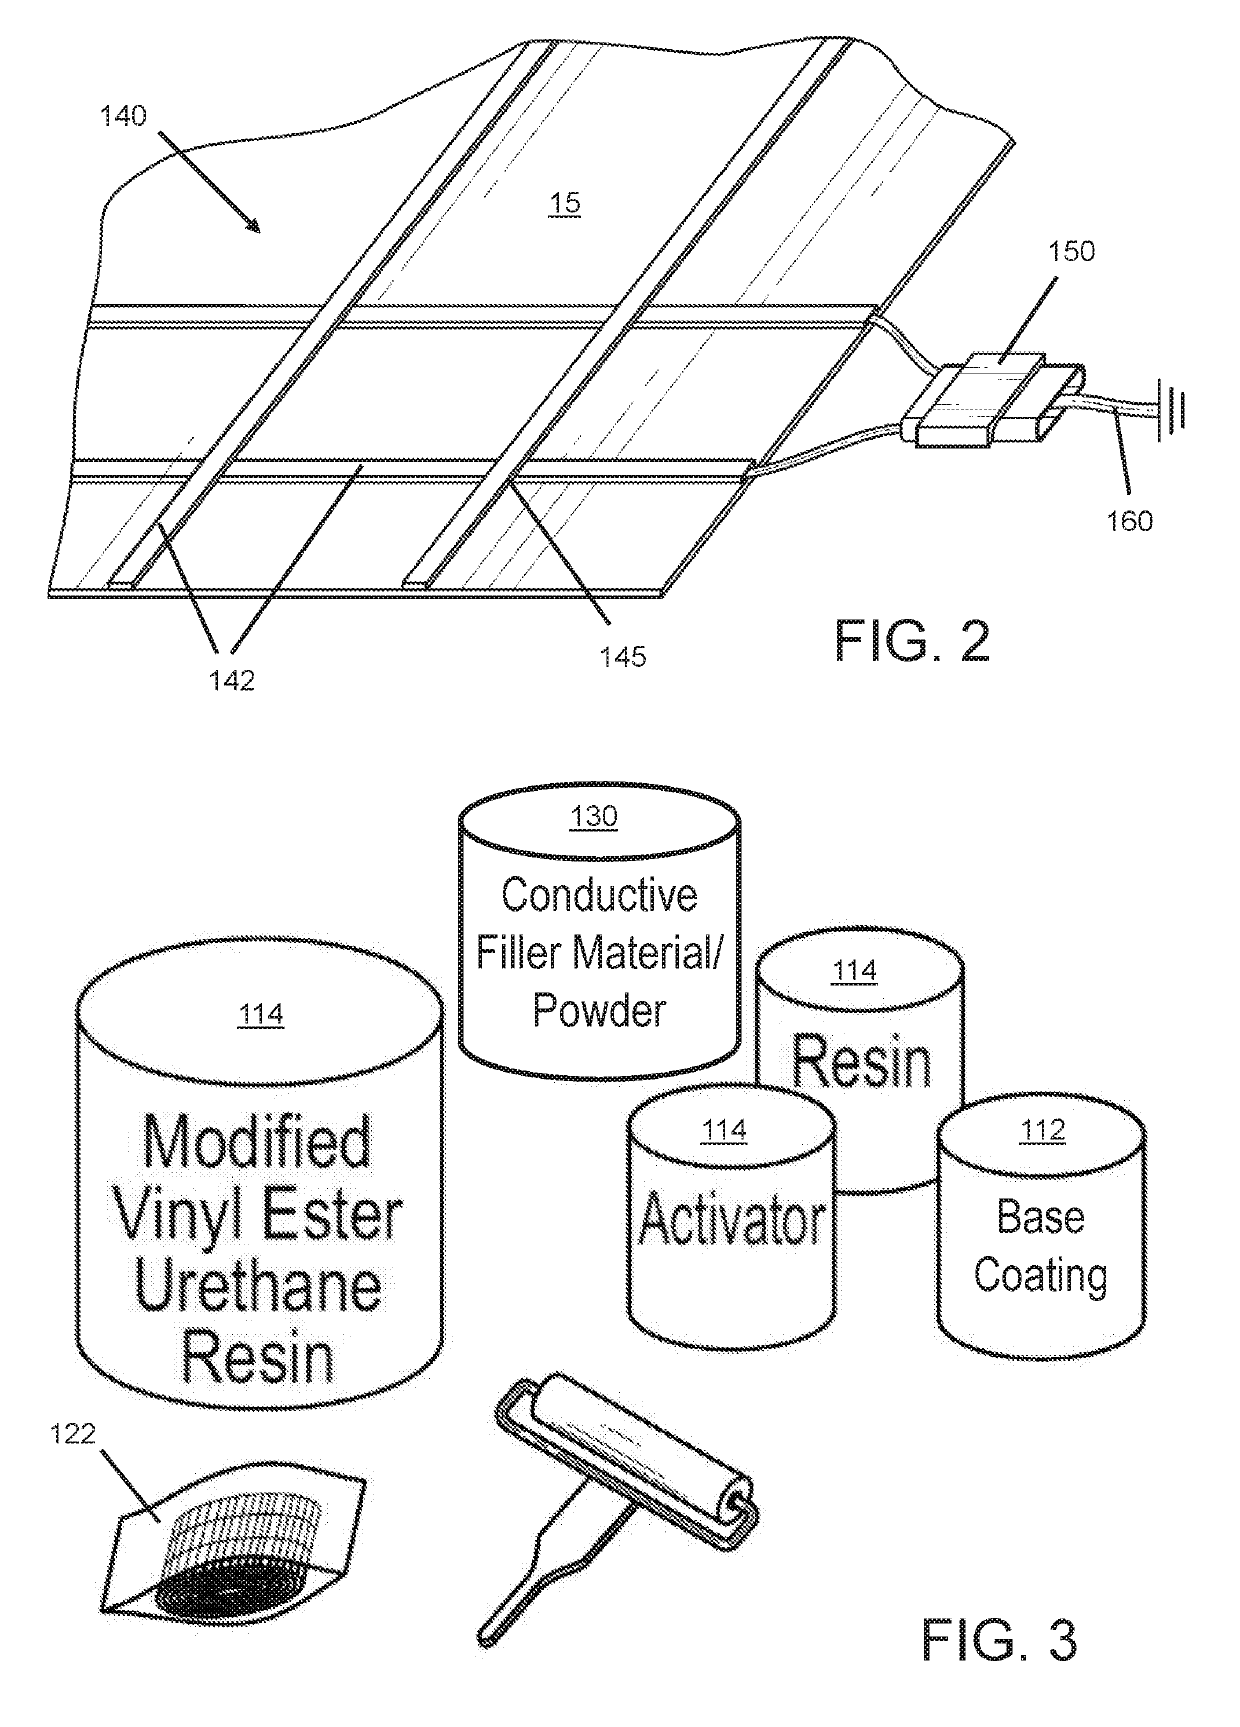 Fiber reinforced systems with electrostatic dissipation